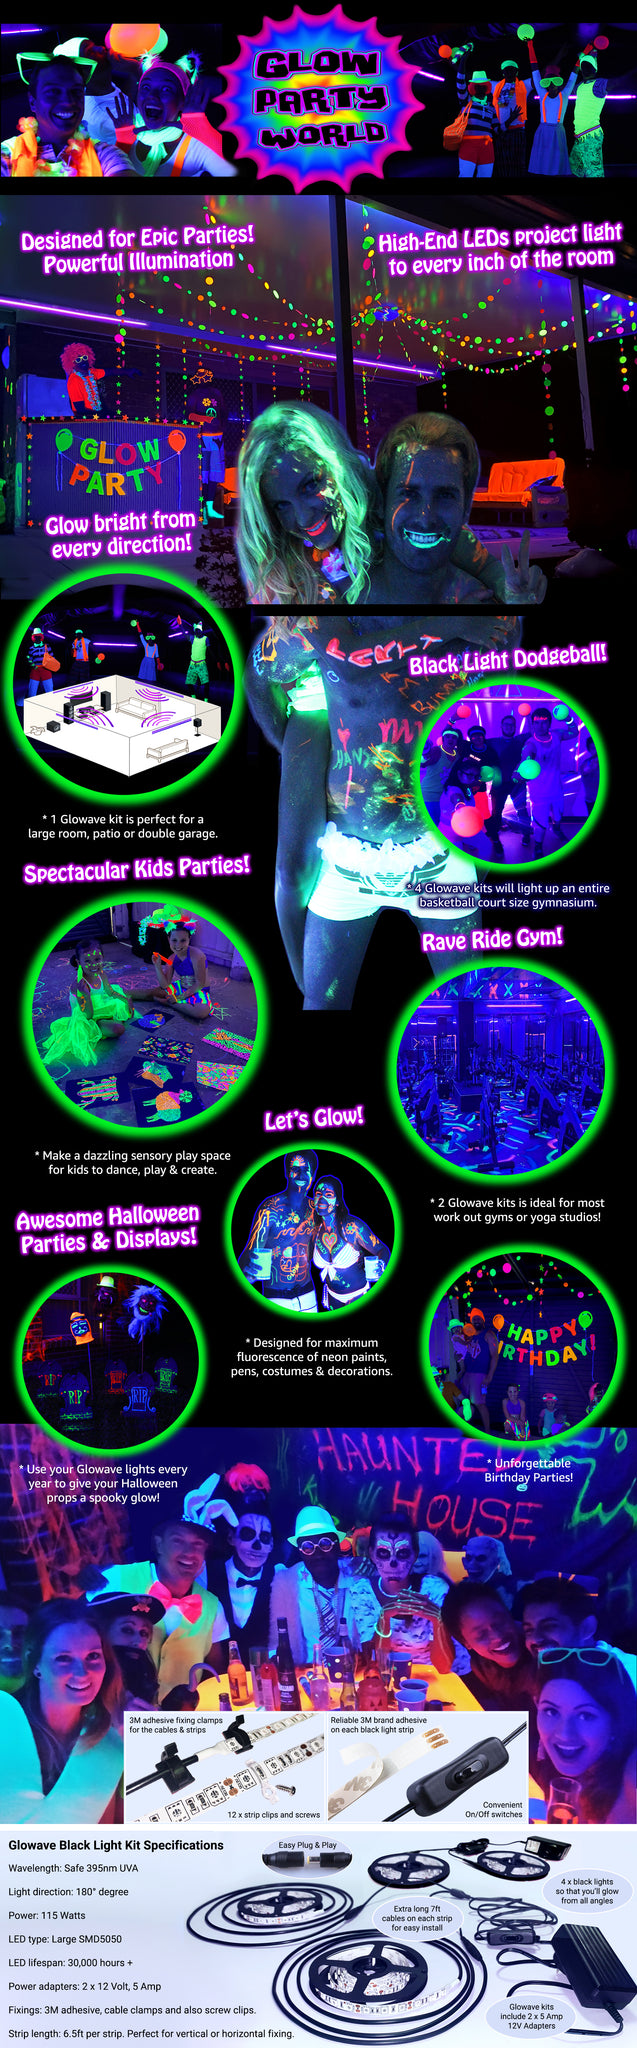 Black Lights For Glow Party! 115W Blacklight LED Strip Kit. 4 UV Lights To  Surround Your Neon Party. Ultraviolet Lighting For Big Rooms. Easy Set Up